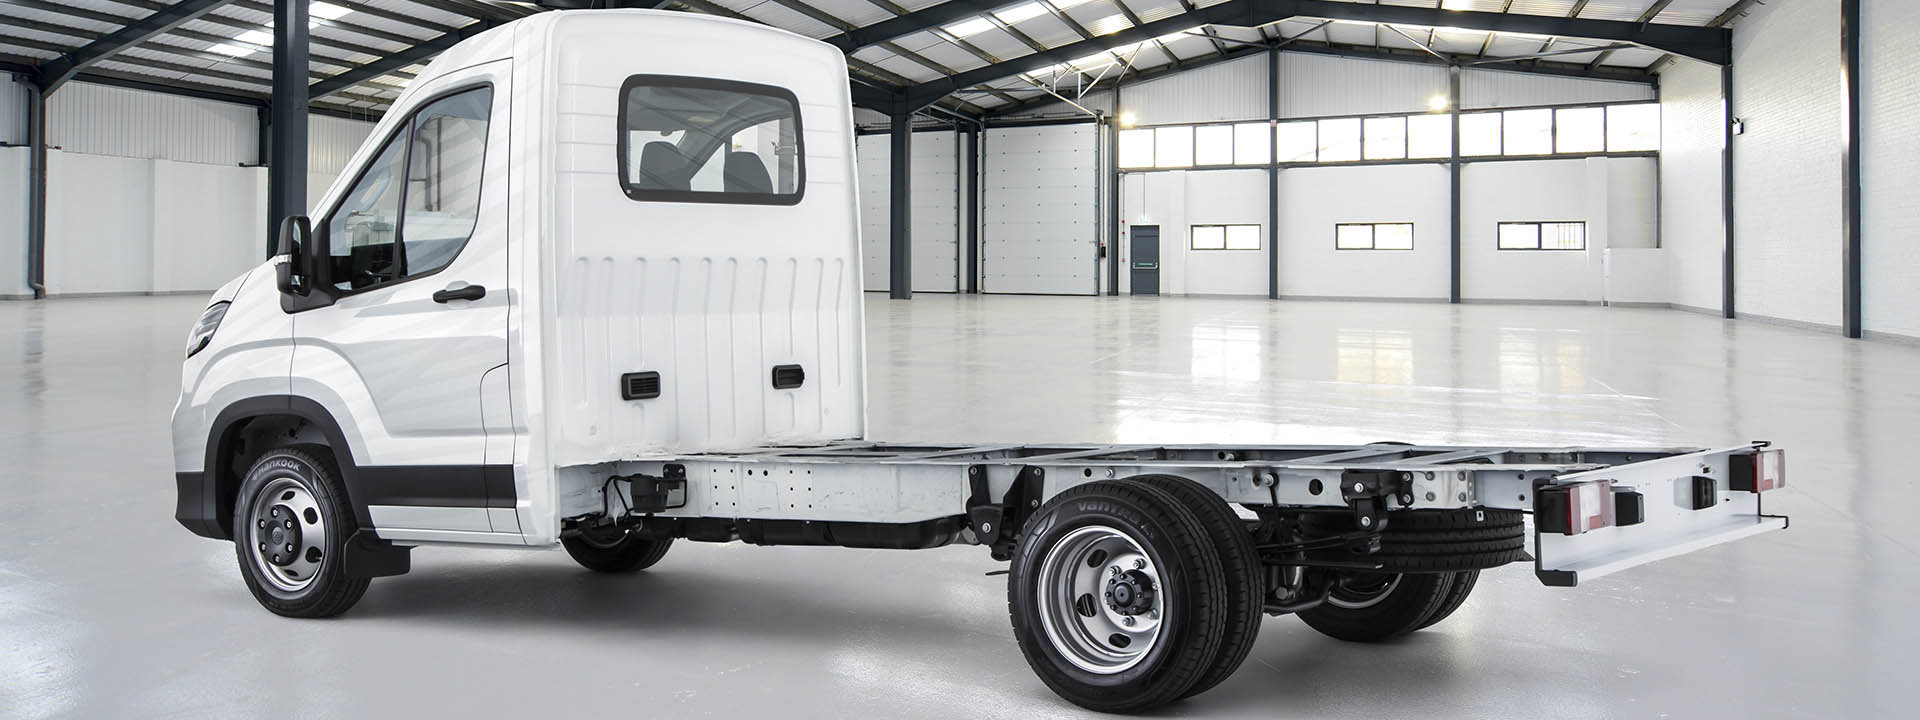 Deliver 9 Cab Chassis Image